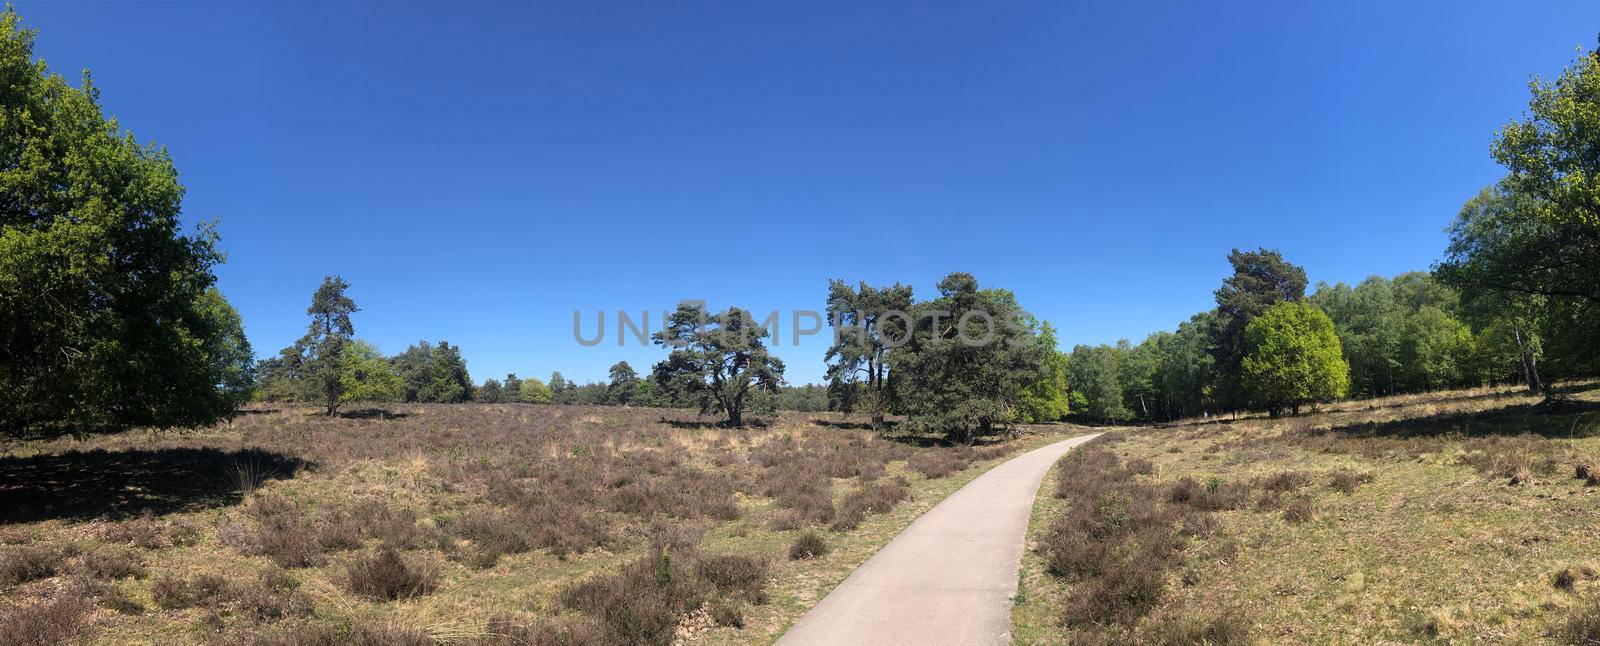 Panorama from a path through National Park De Hoge Veluwe by traveltelly